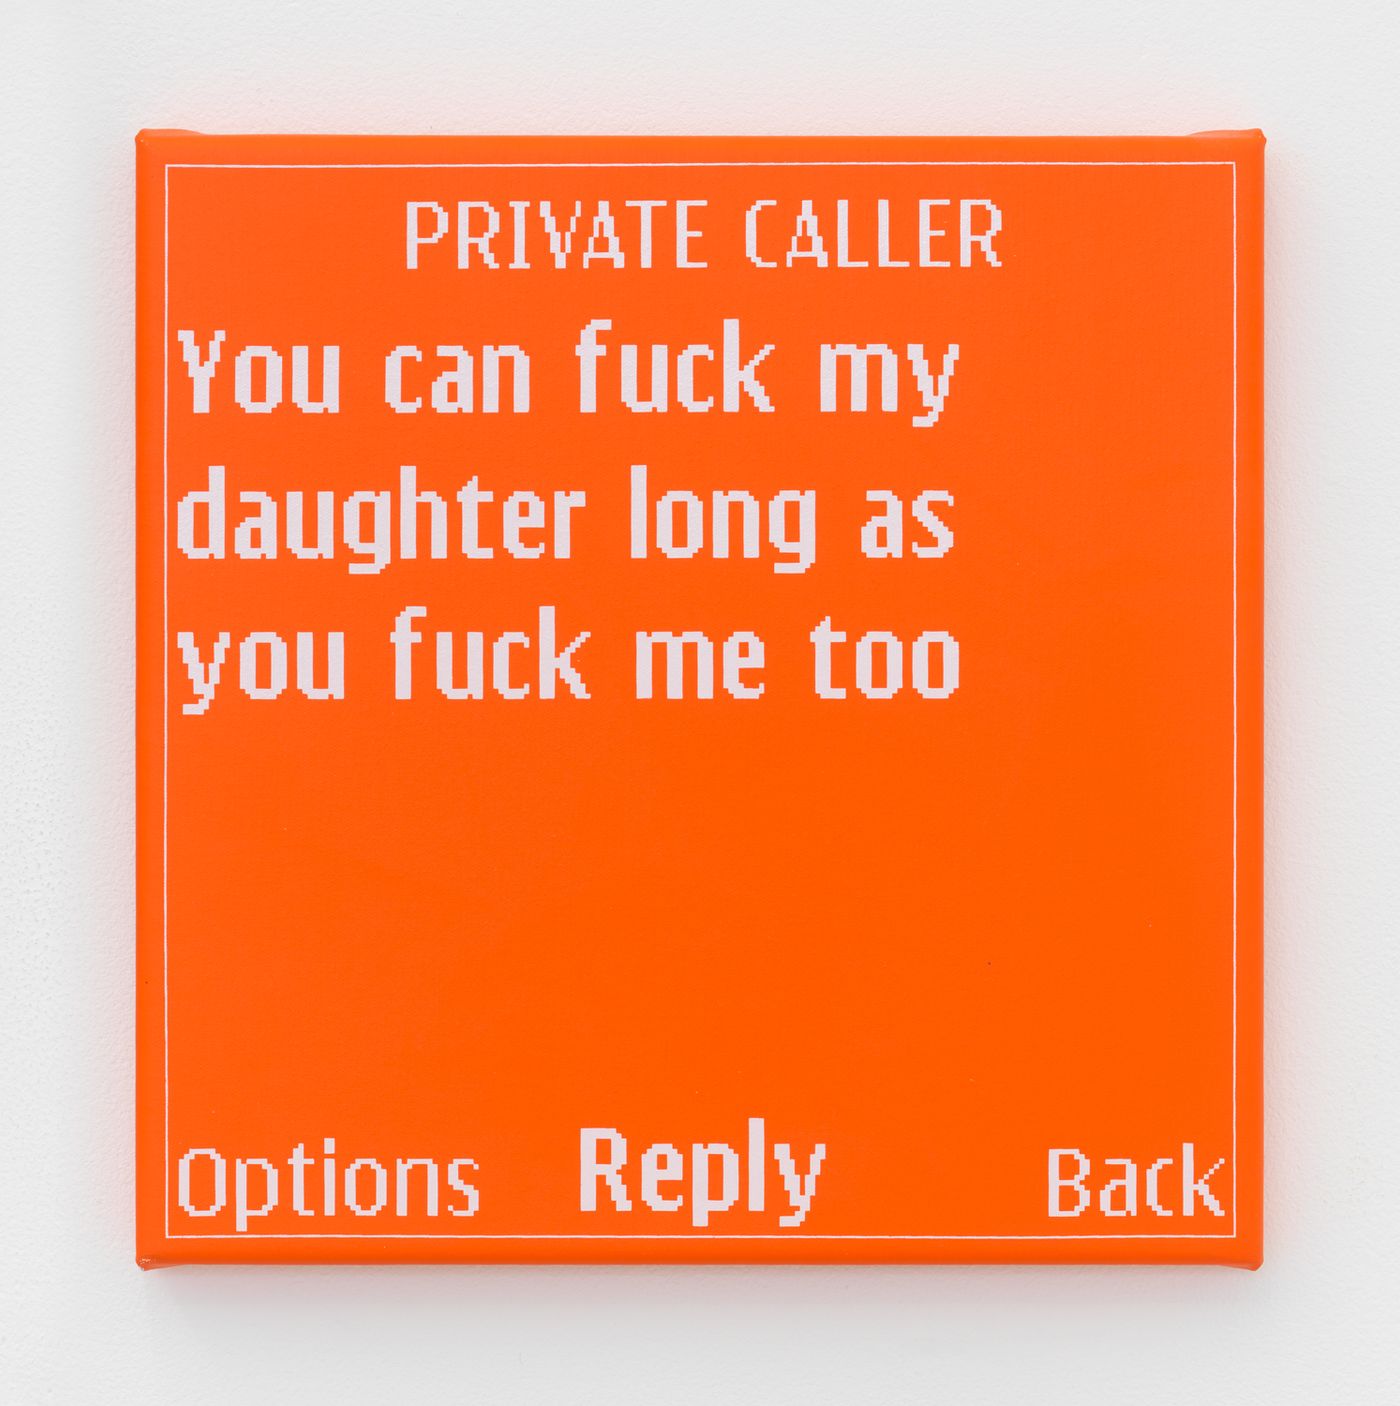 Adam McEwen, Untitled (Private Caller), 2009. Acrylic and silkscreen ink on canvas, 10 x 10 in (25.4 x 25.4 cm).